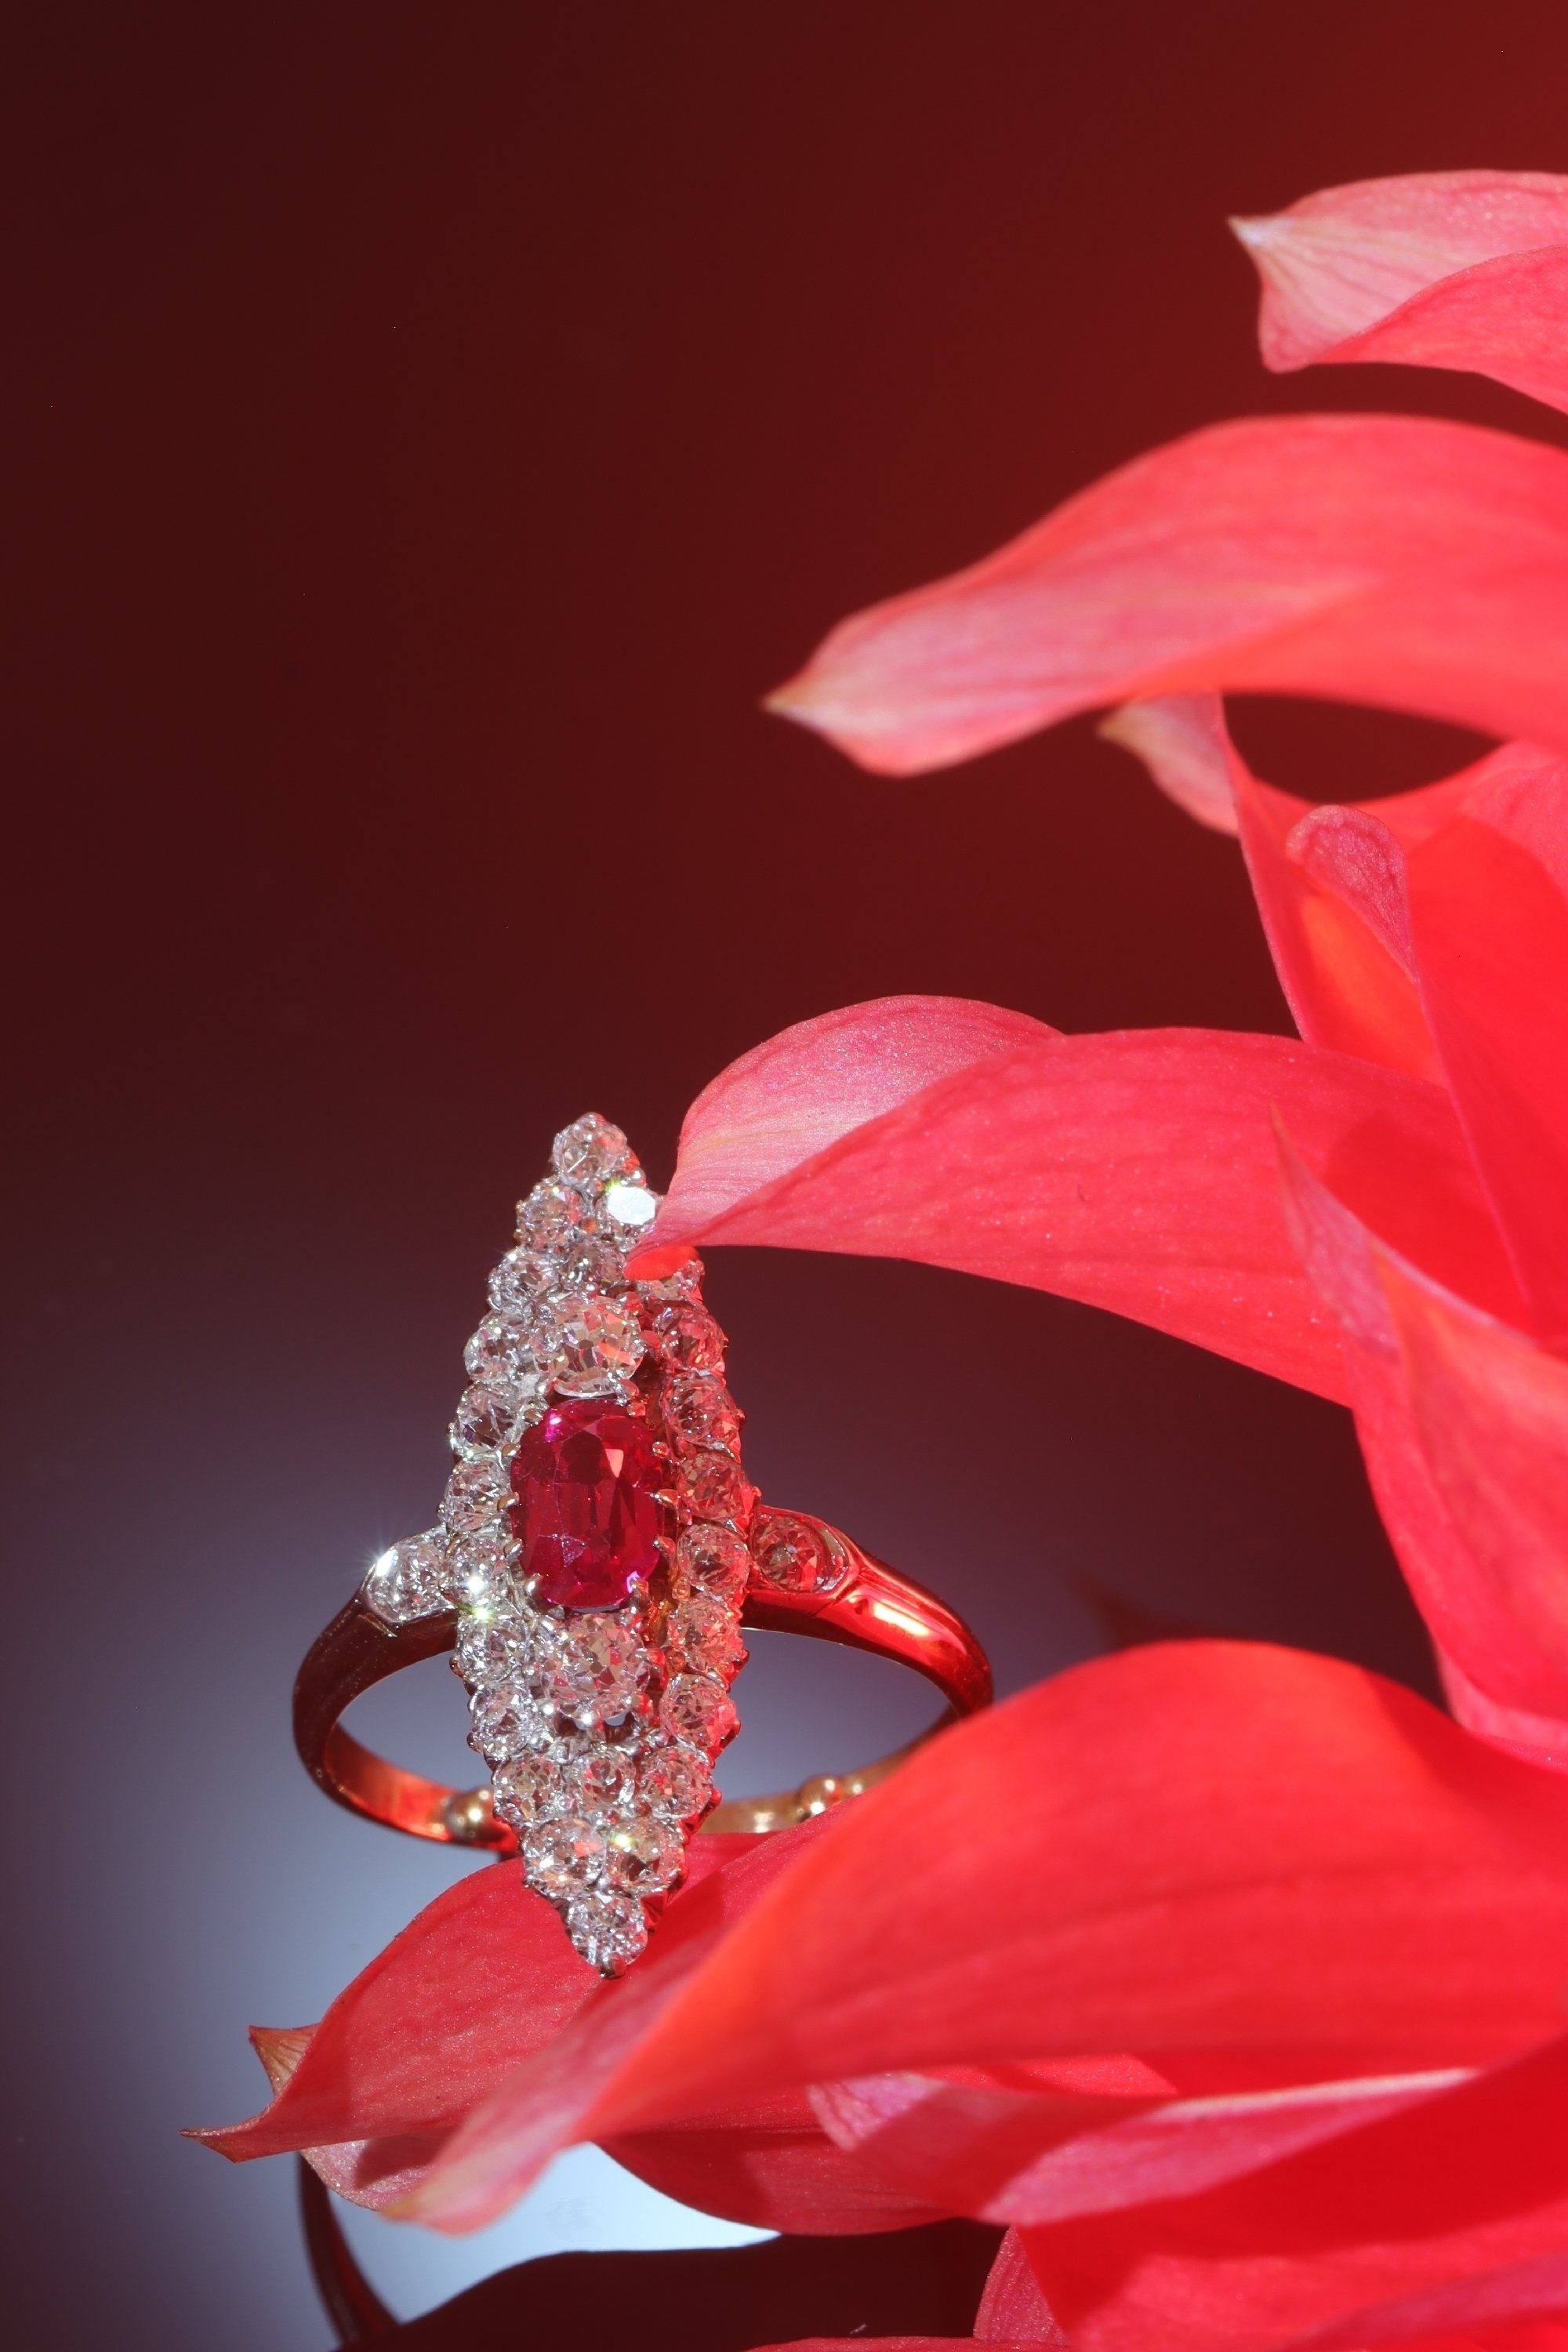 Click the picture to see more of this antique Victorian diamond ring with lovely untreated high quality ruby